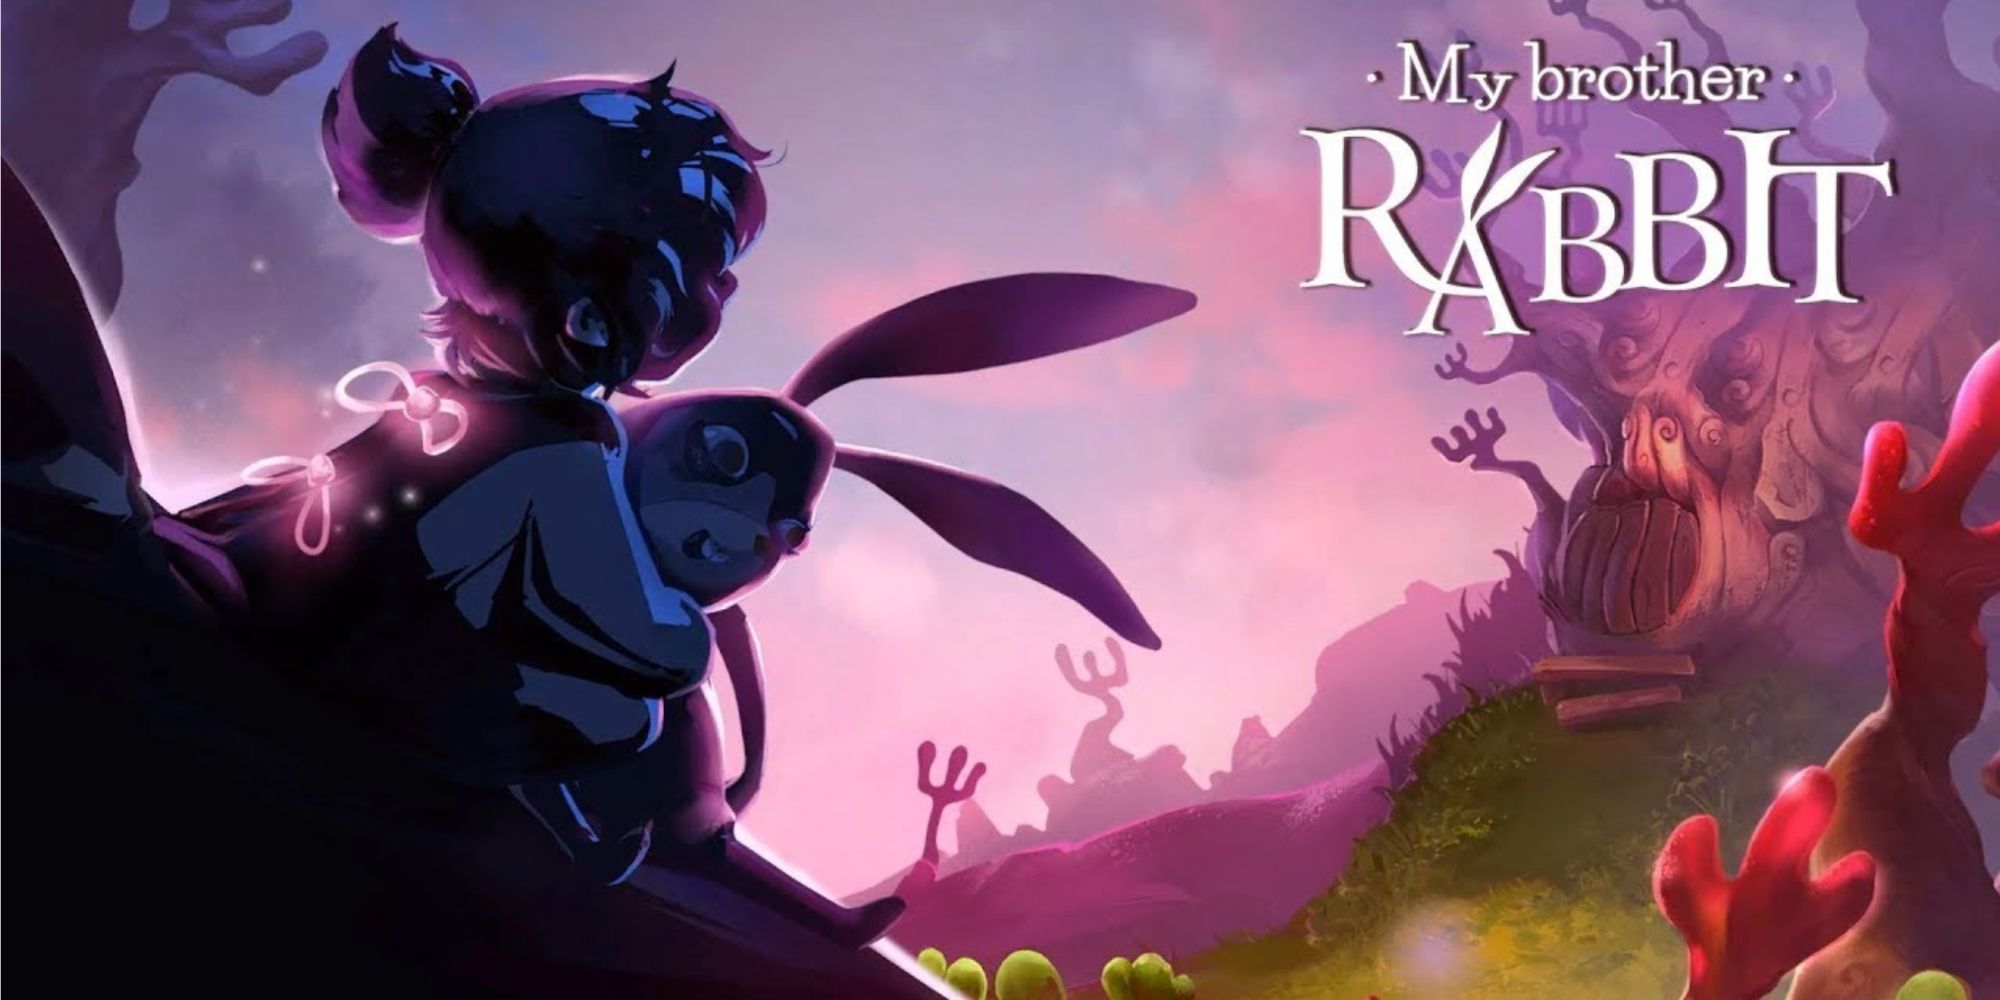 My Brother Rabbit Cover Image Girl Hugs Stuffed Rabbit In front of fantasy forest scene